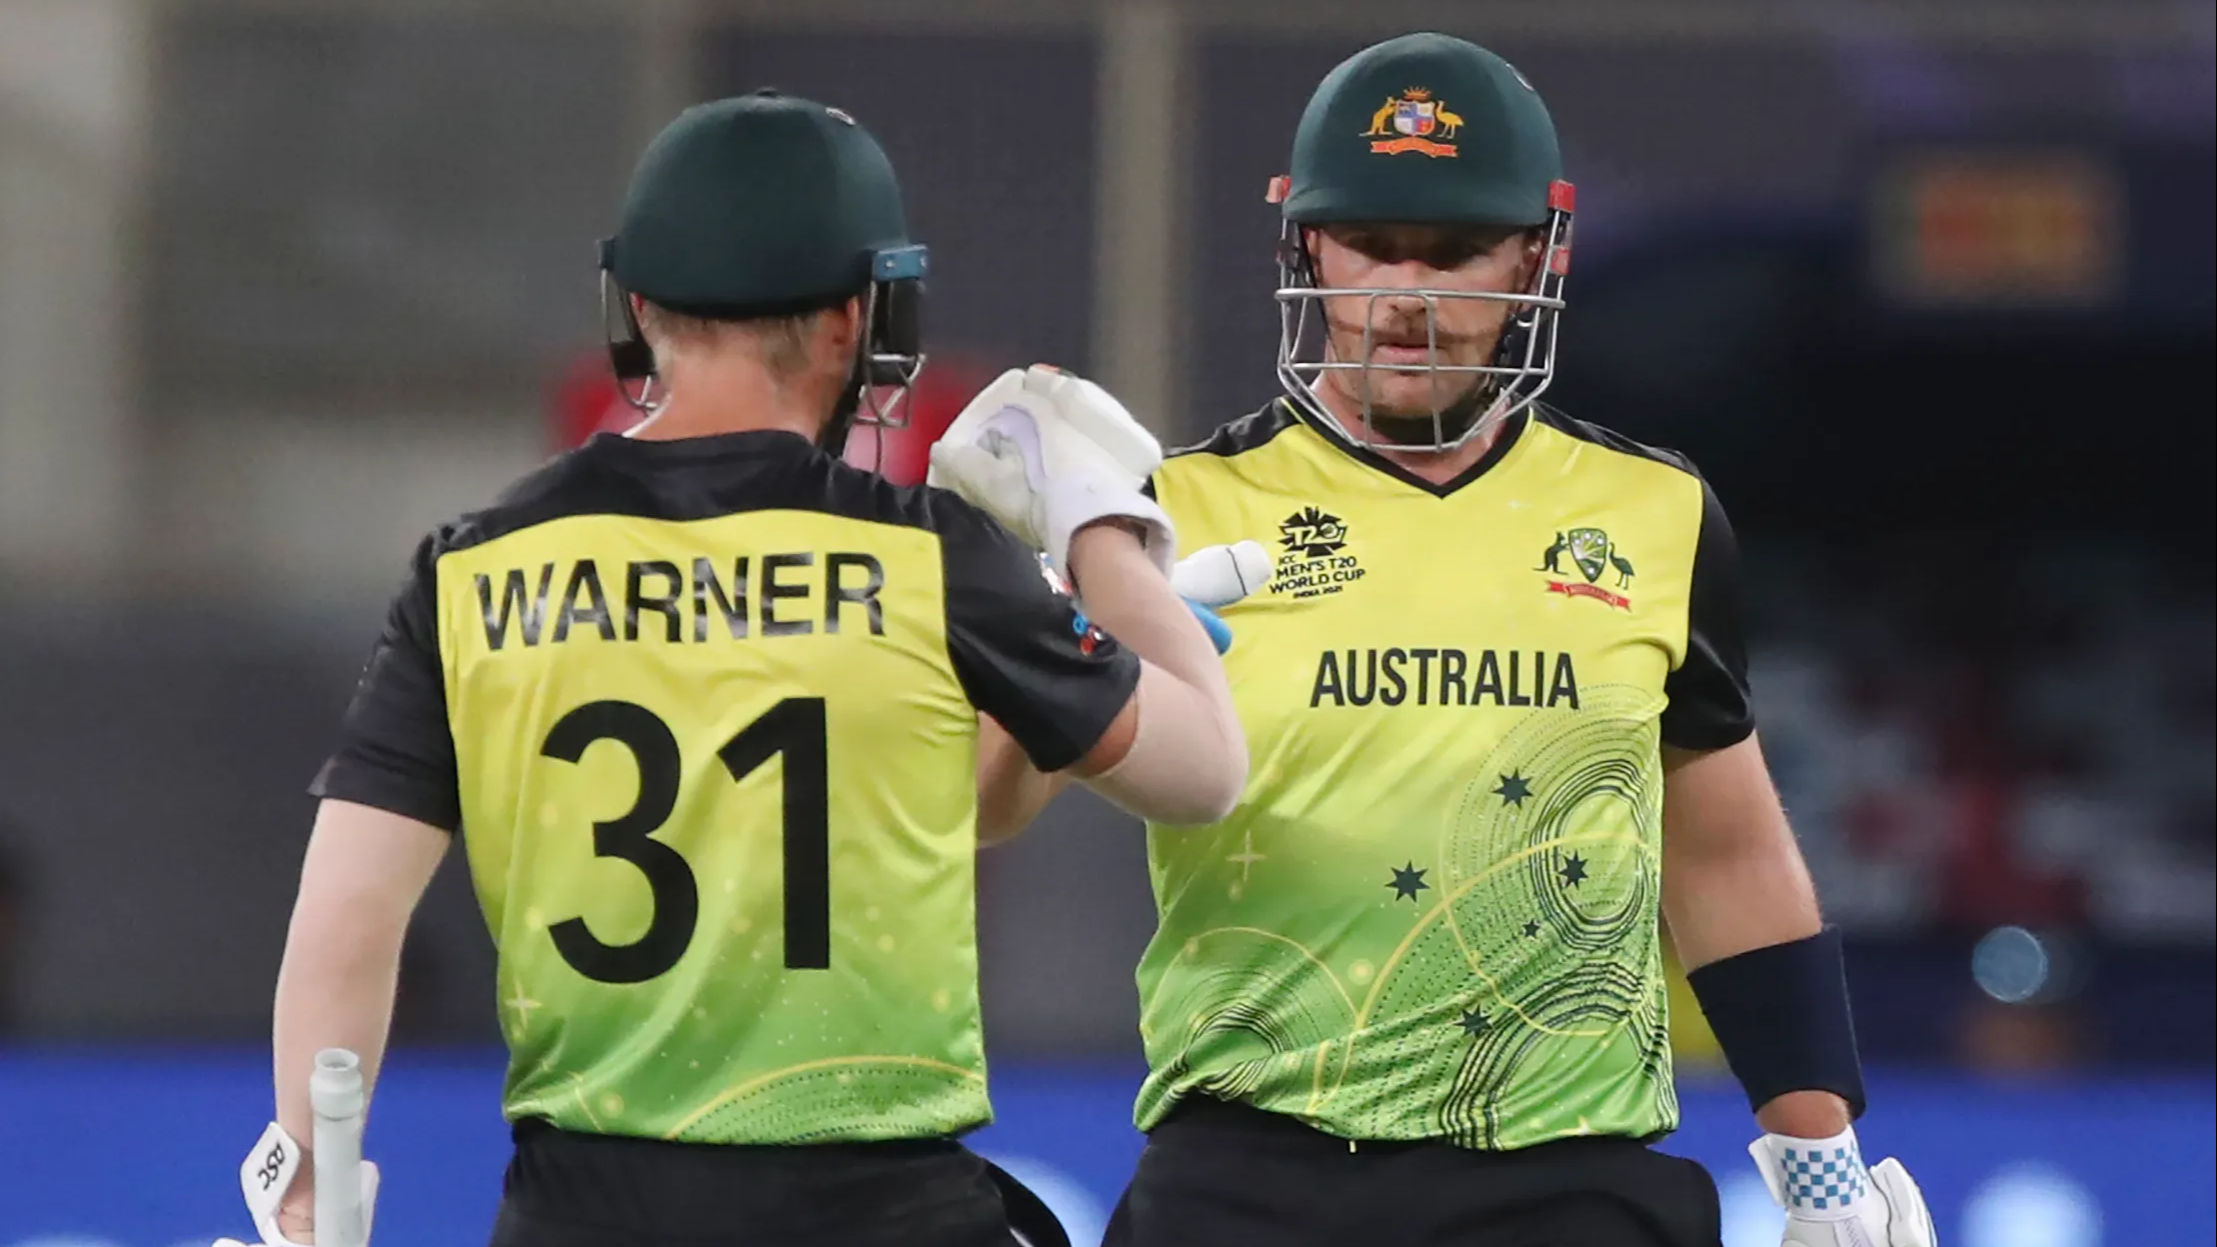 Reaching T20 World Cup final wasn’t unexpected: Australia captain Aaron Finch